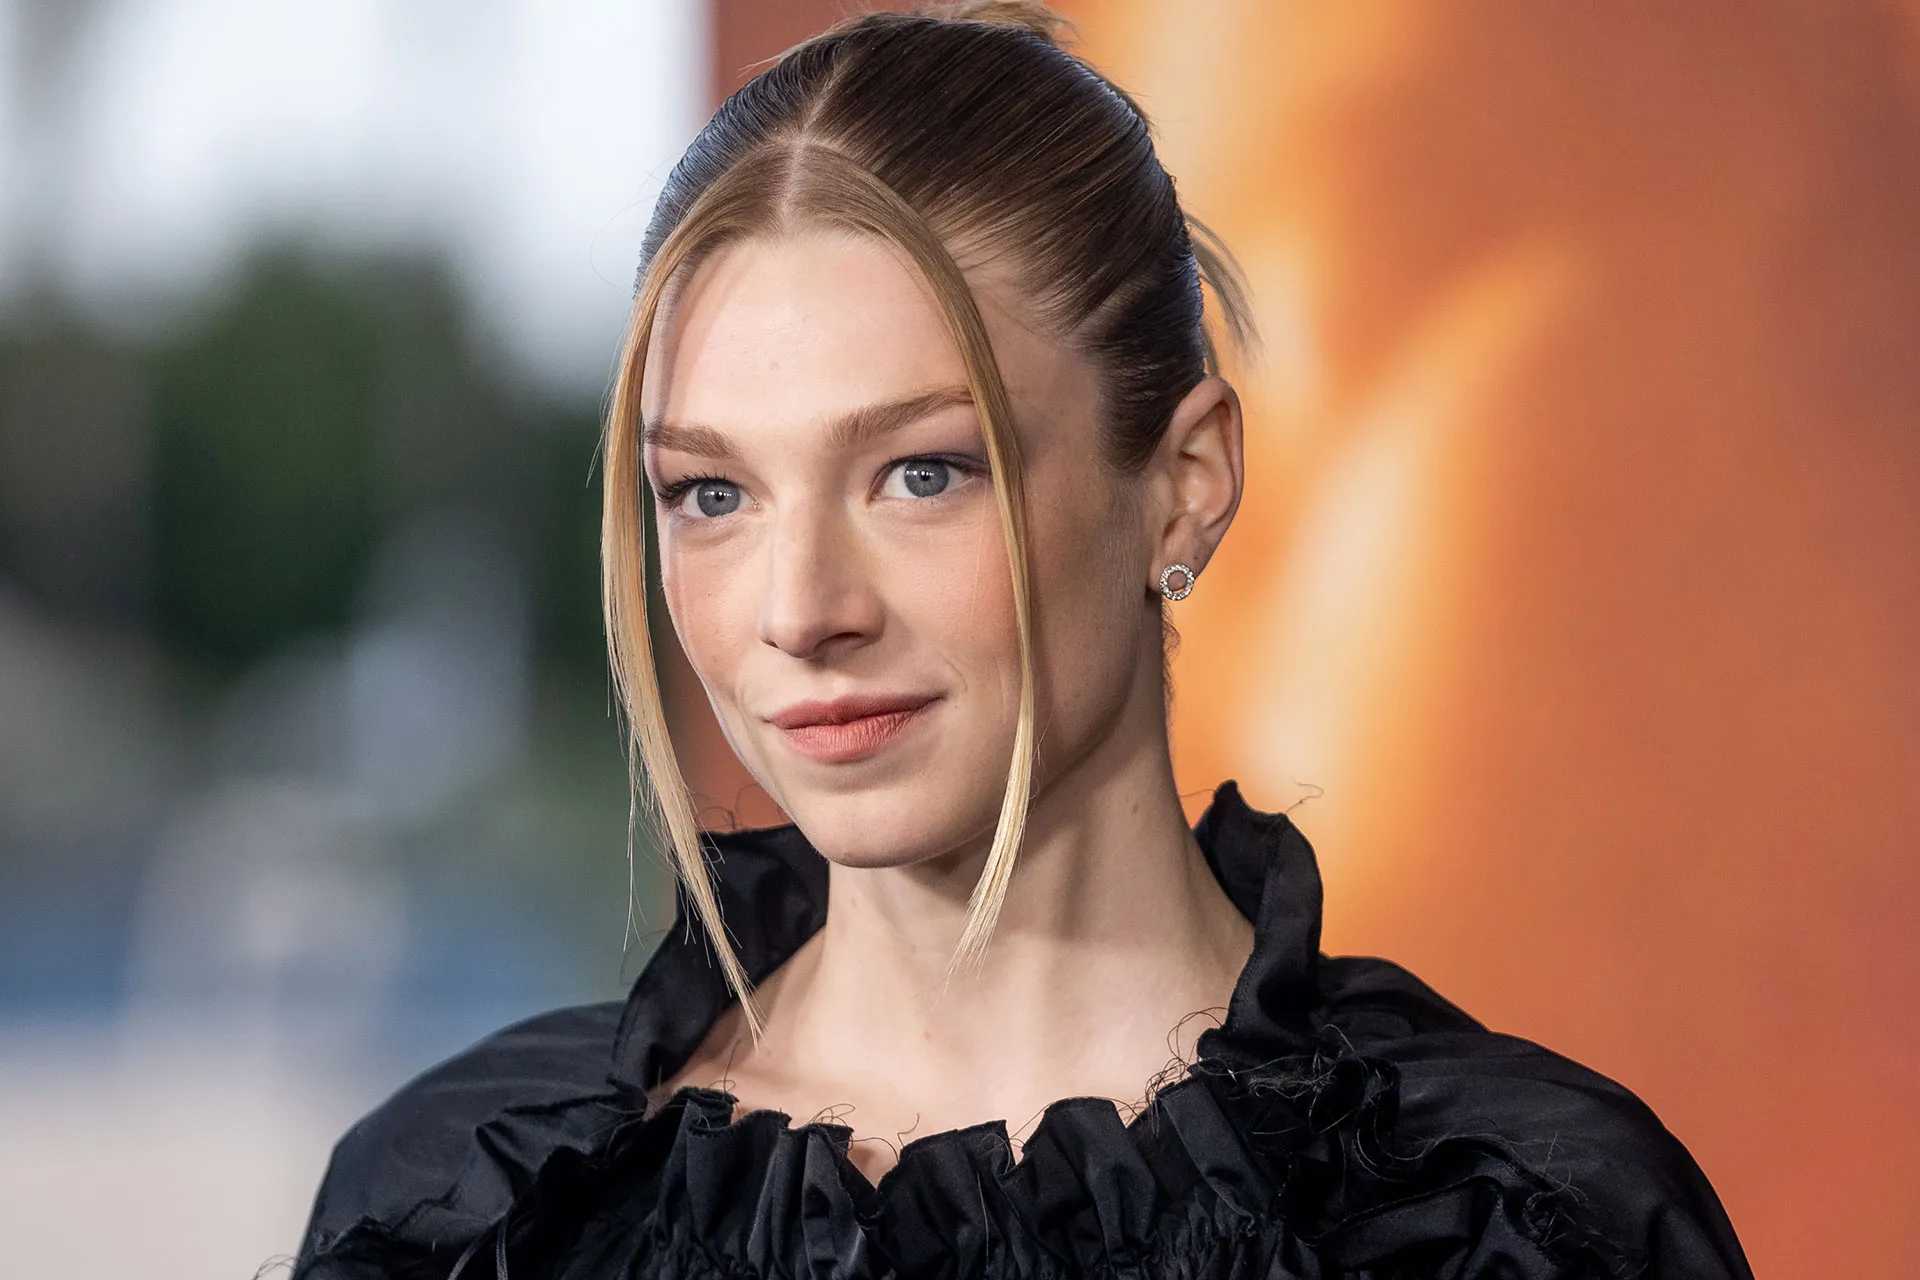 Euphoria star Hunter Schafer arrested at Gaza Cease Fire Rally in NYC - All you need to know